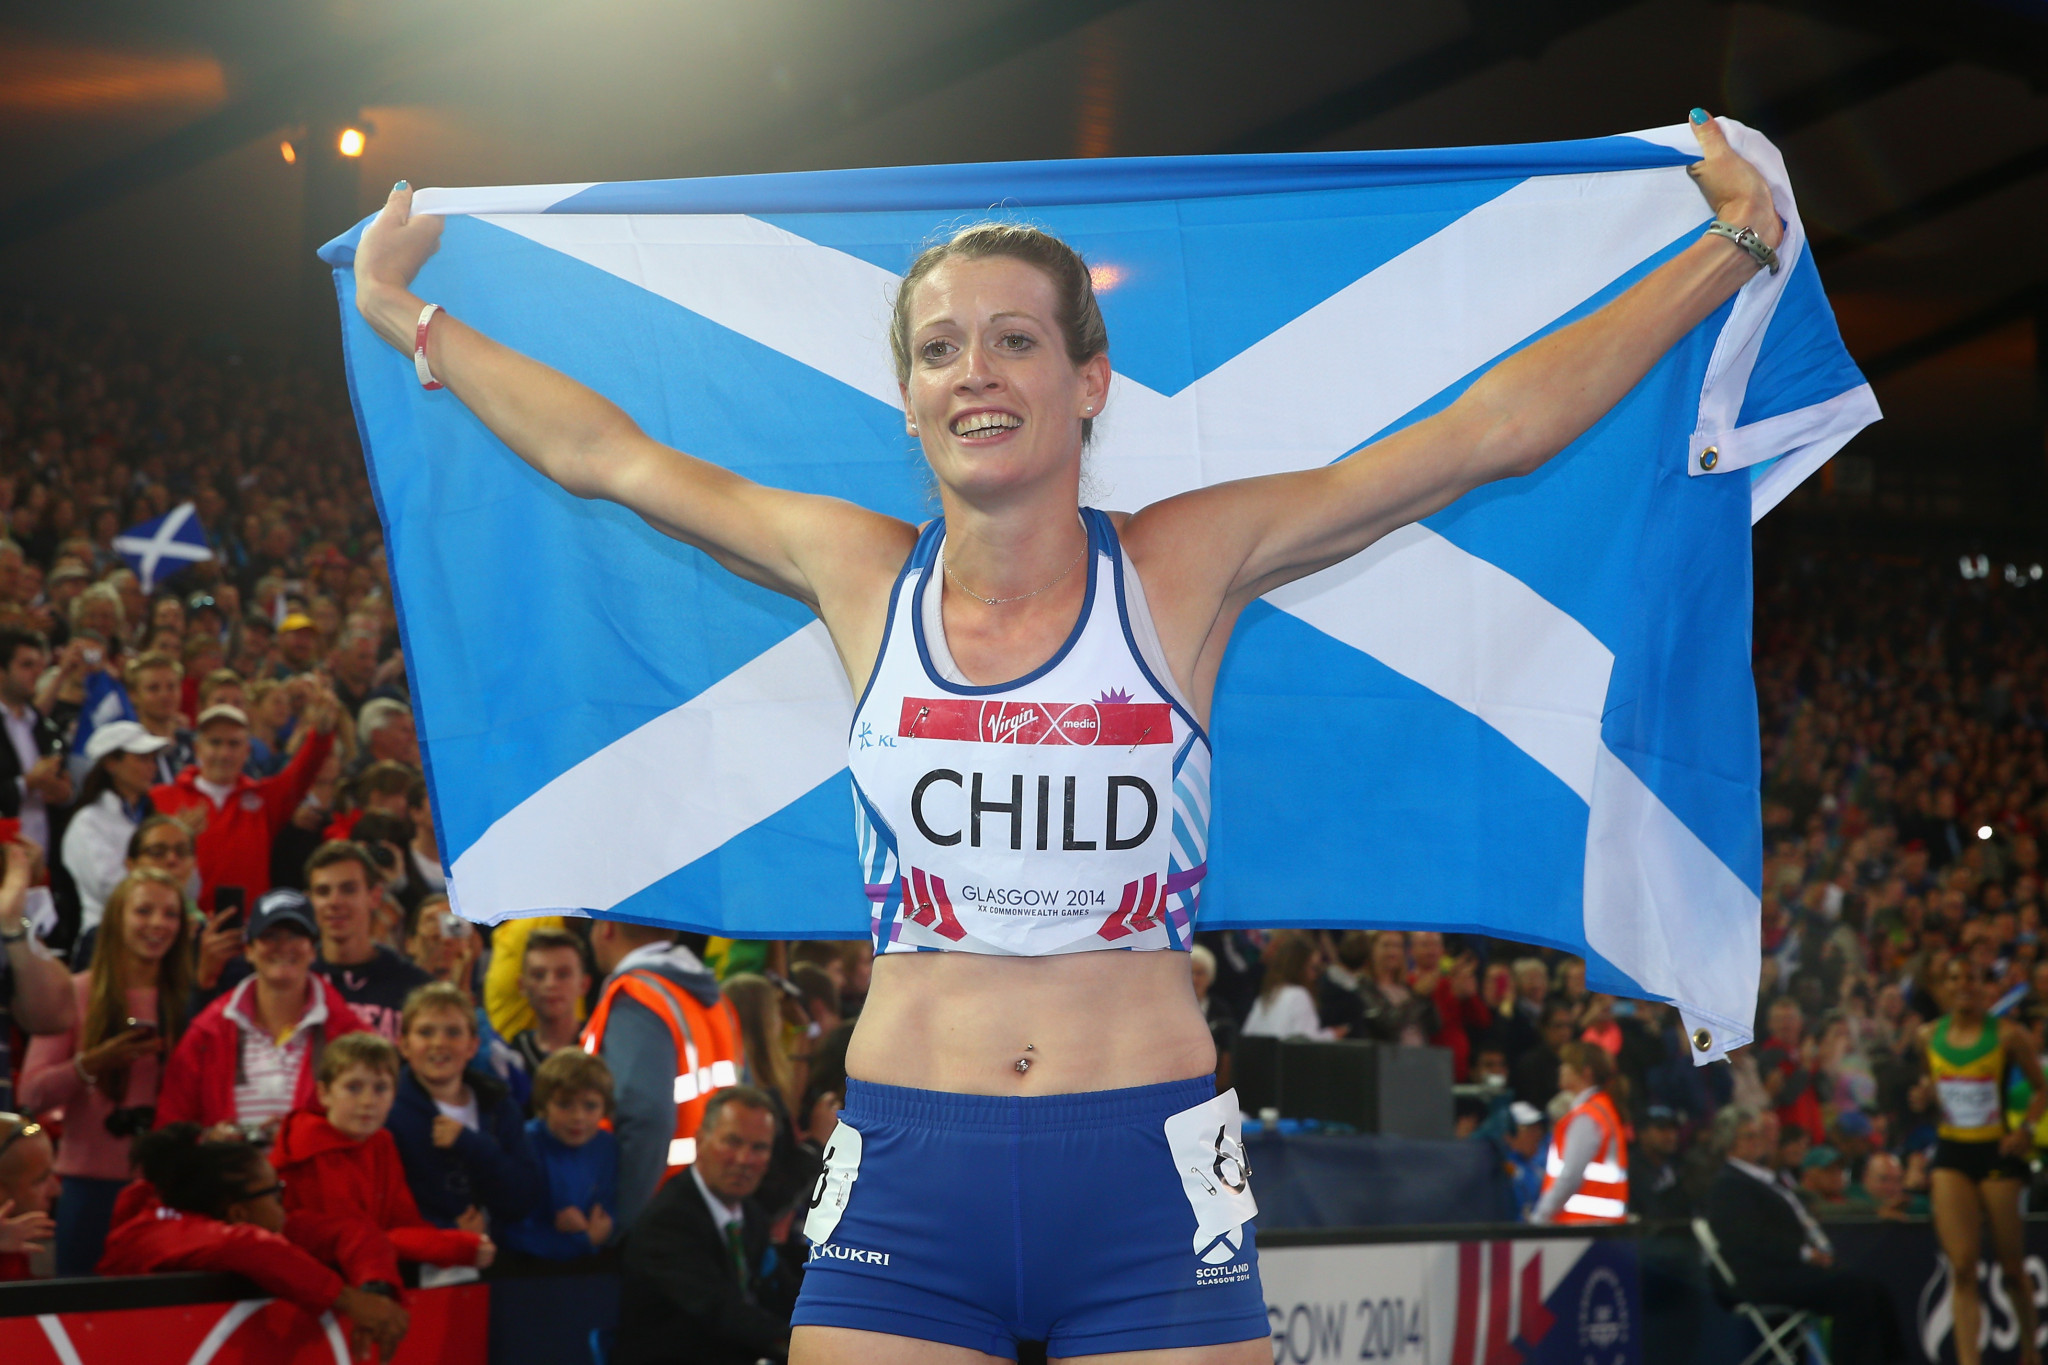 Eilidh Doyle has earned silver medals at the last two Commonwealth Games ©Getty Images